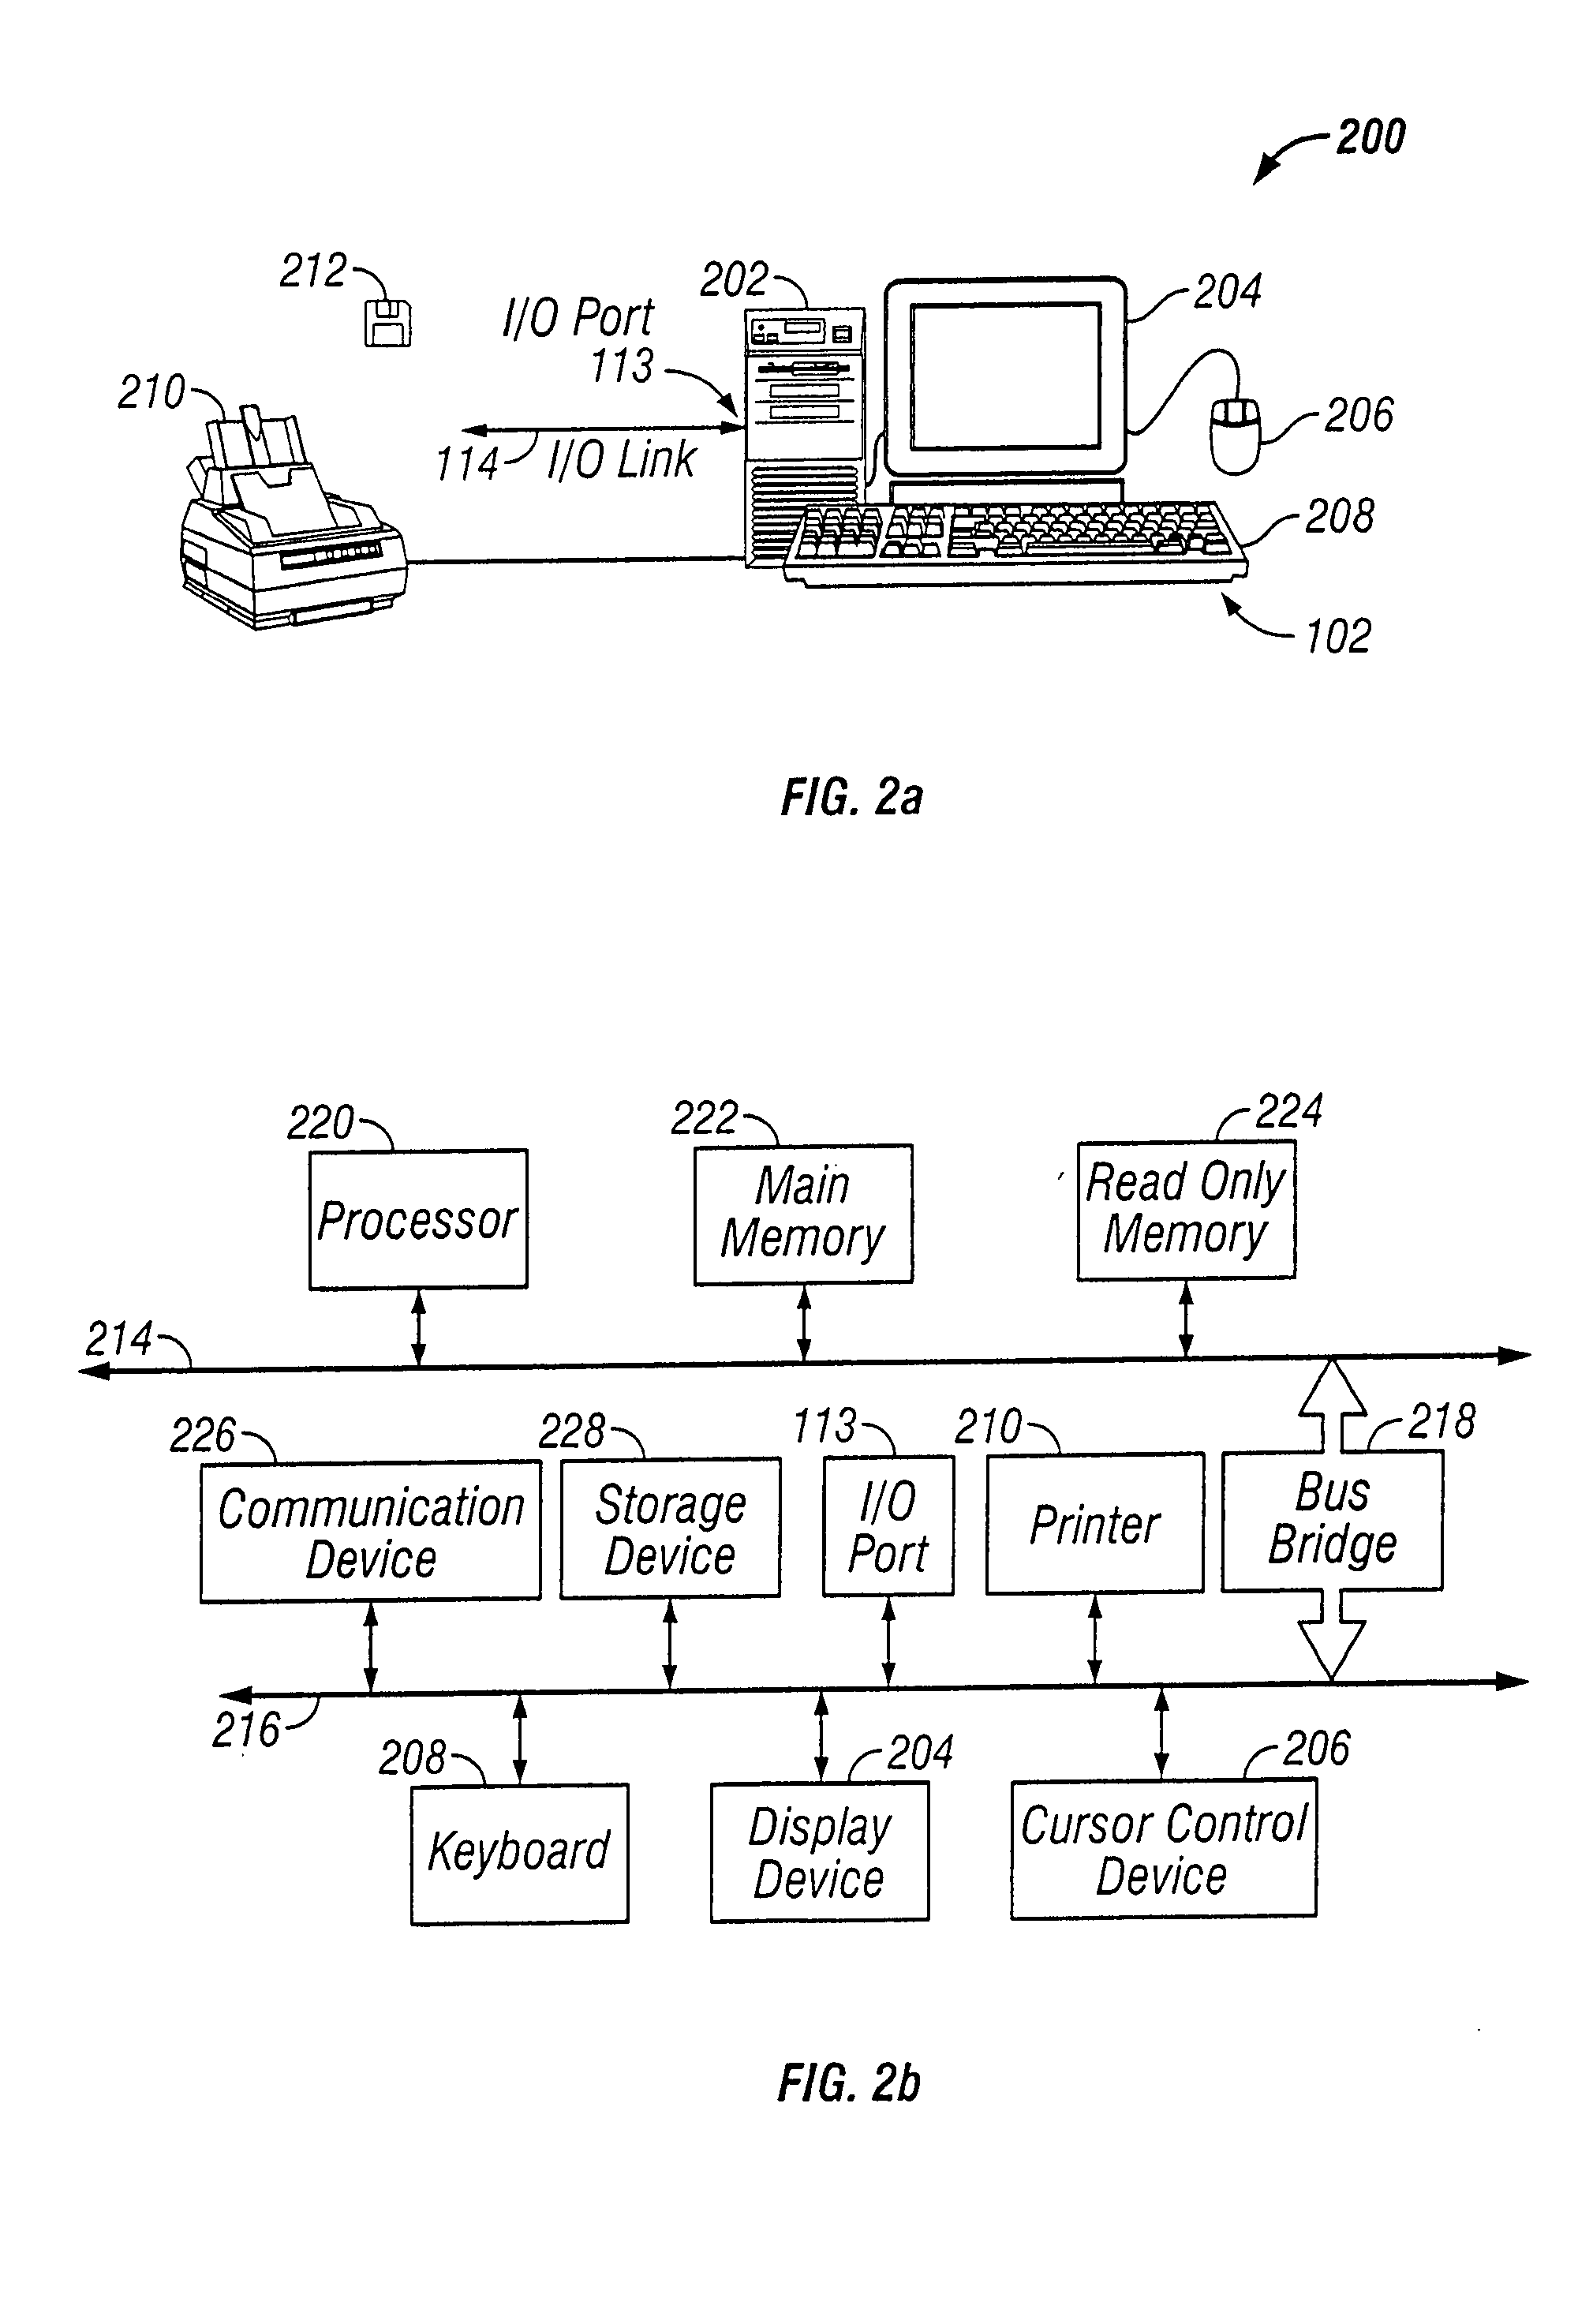 Computing device to allow for the selection and display of a multimedia presentation of an audio file and to allow a user to play a musical instrument in conjunction with the multimedia presentation